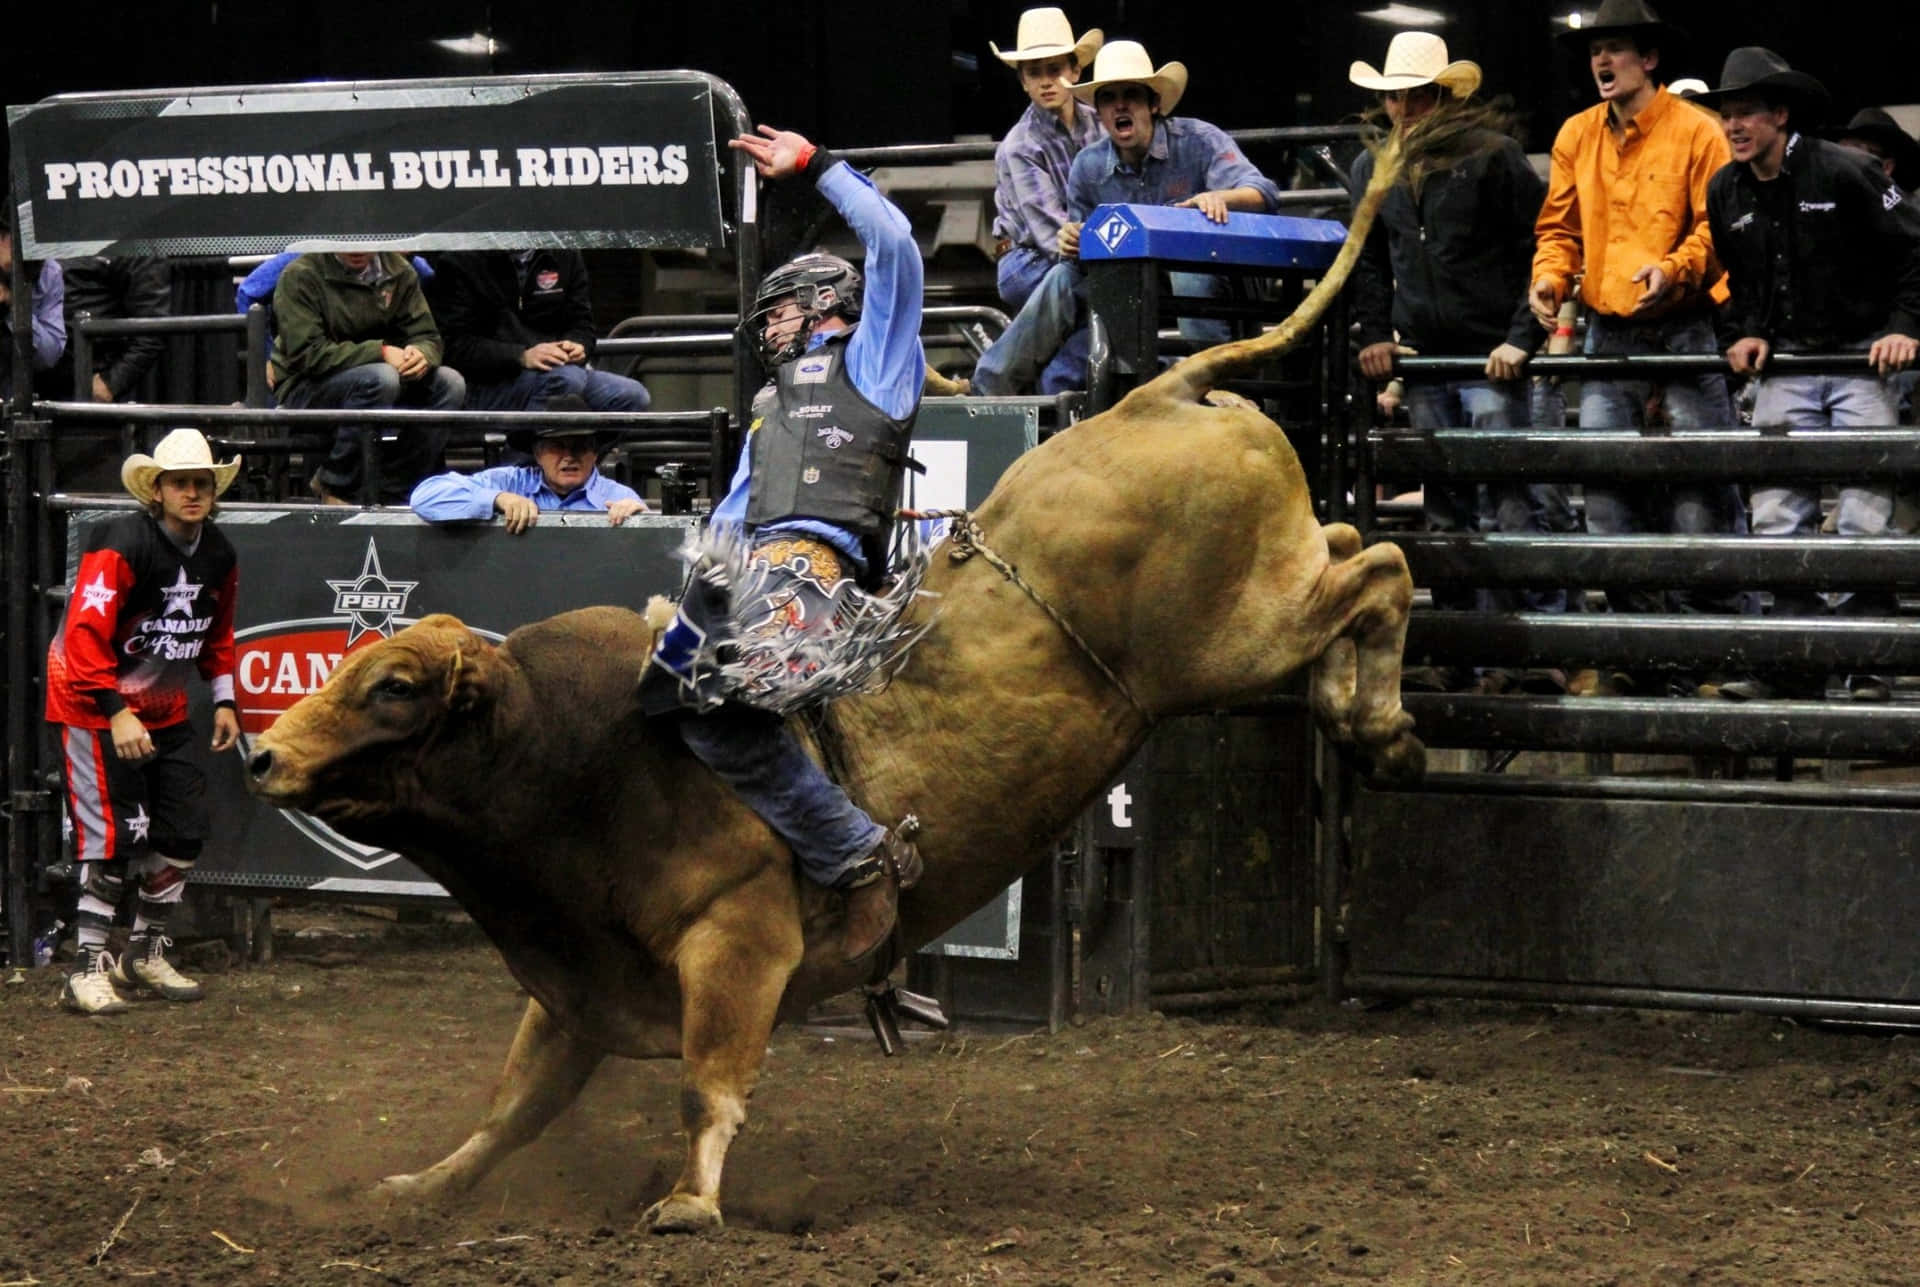 "A brave bull rider determined to take on the challenge"